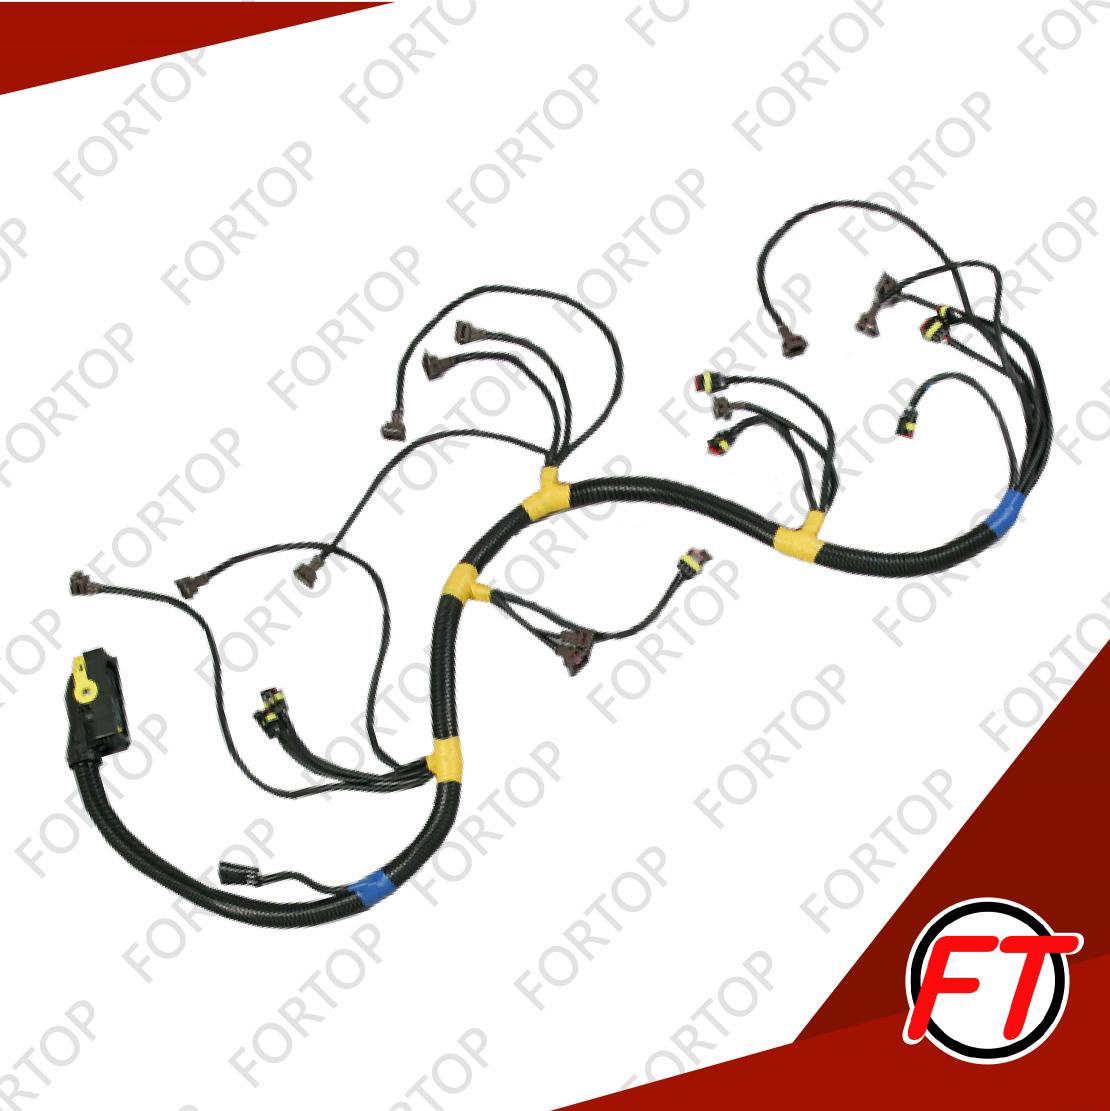 Wiring Harness for Agricultural Machines